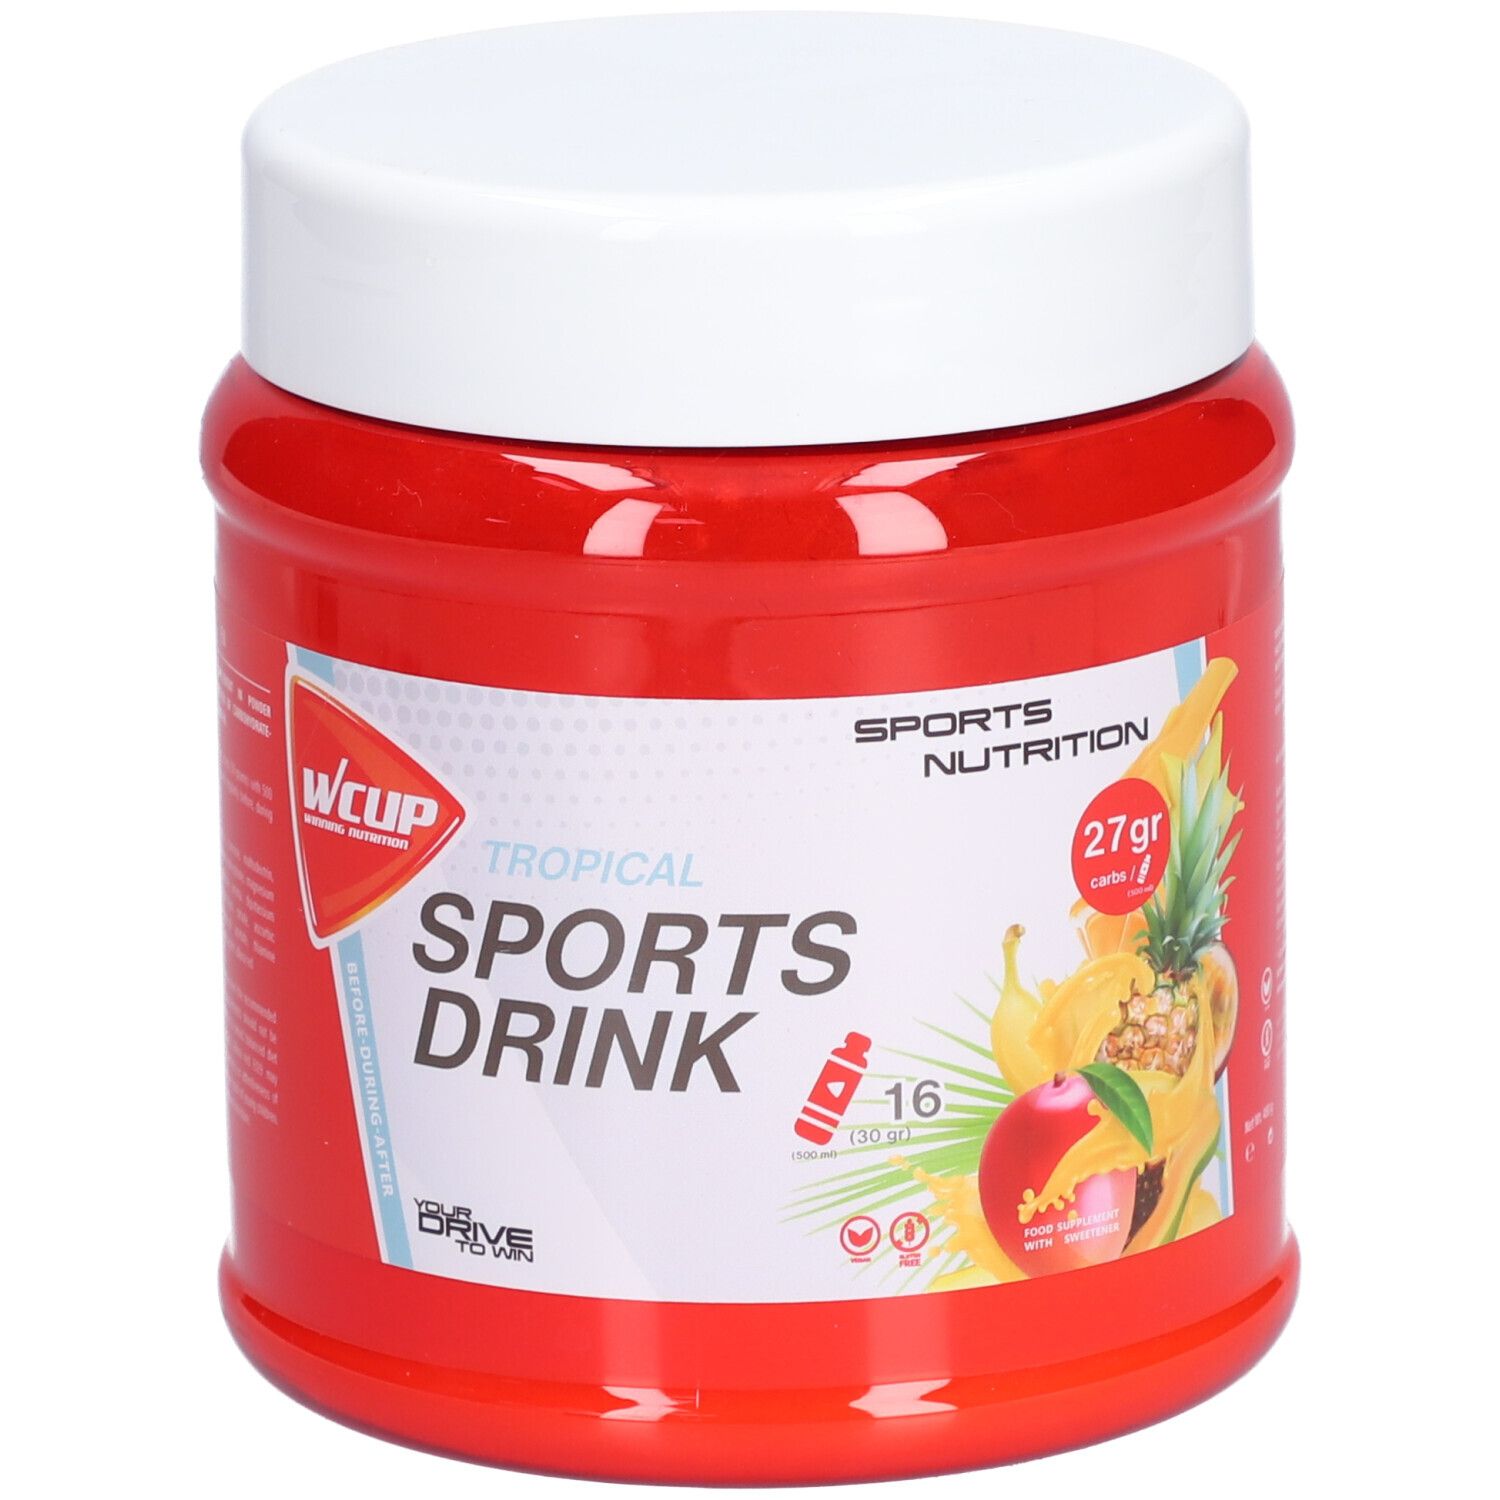 Wcup Sports Drink Tropical